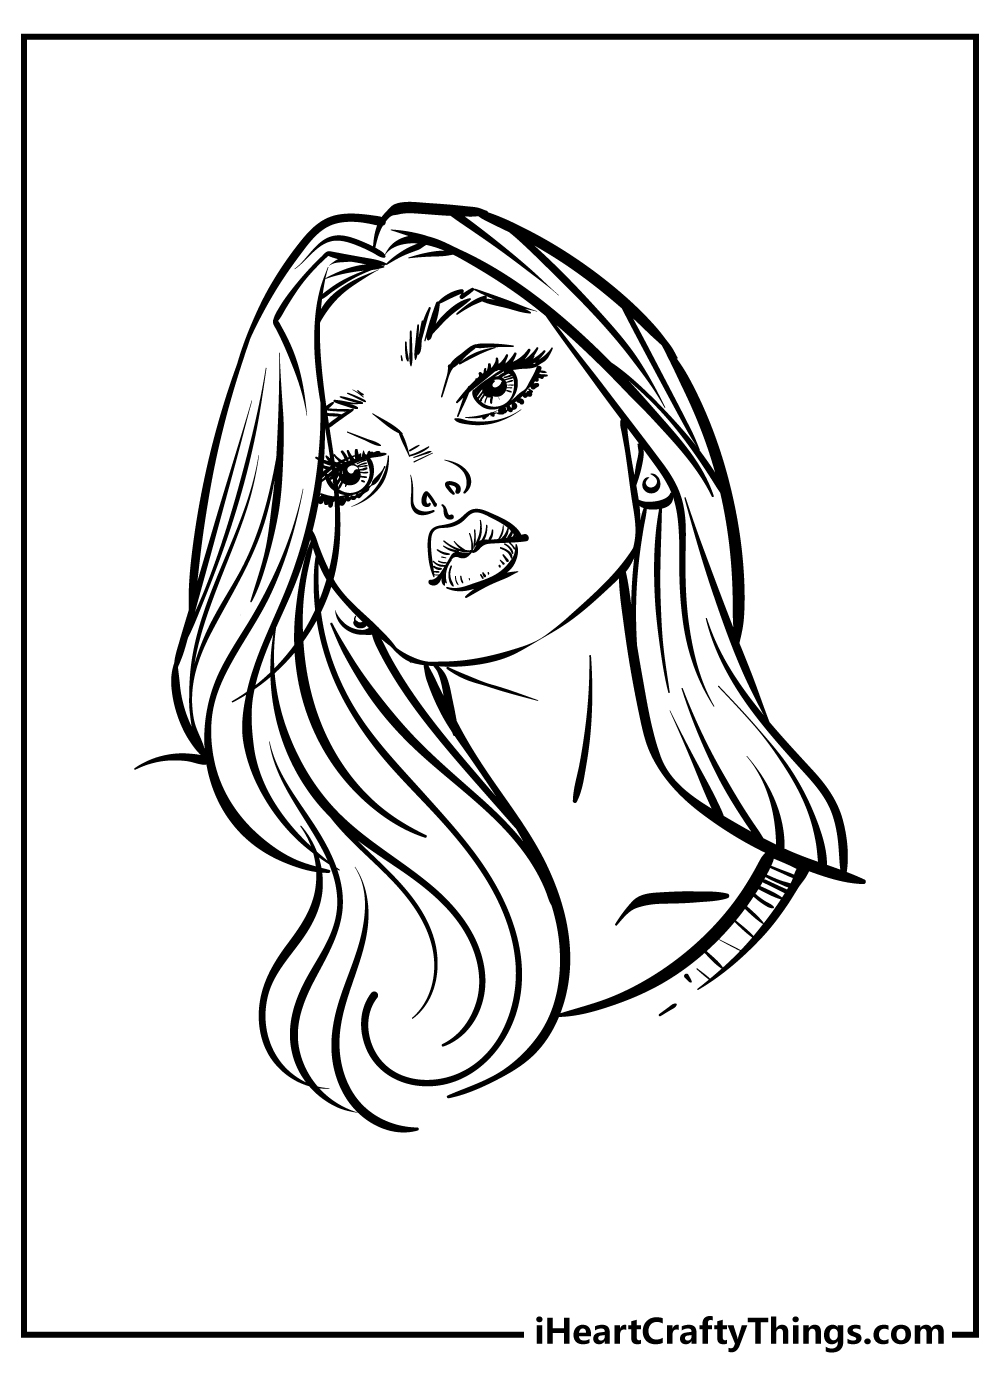 Printable Girly Coloring Pages Updated 20